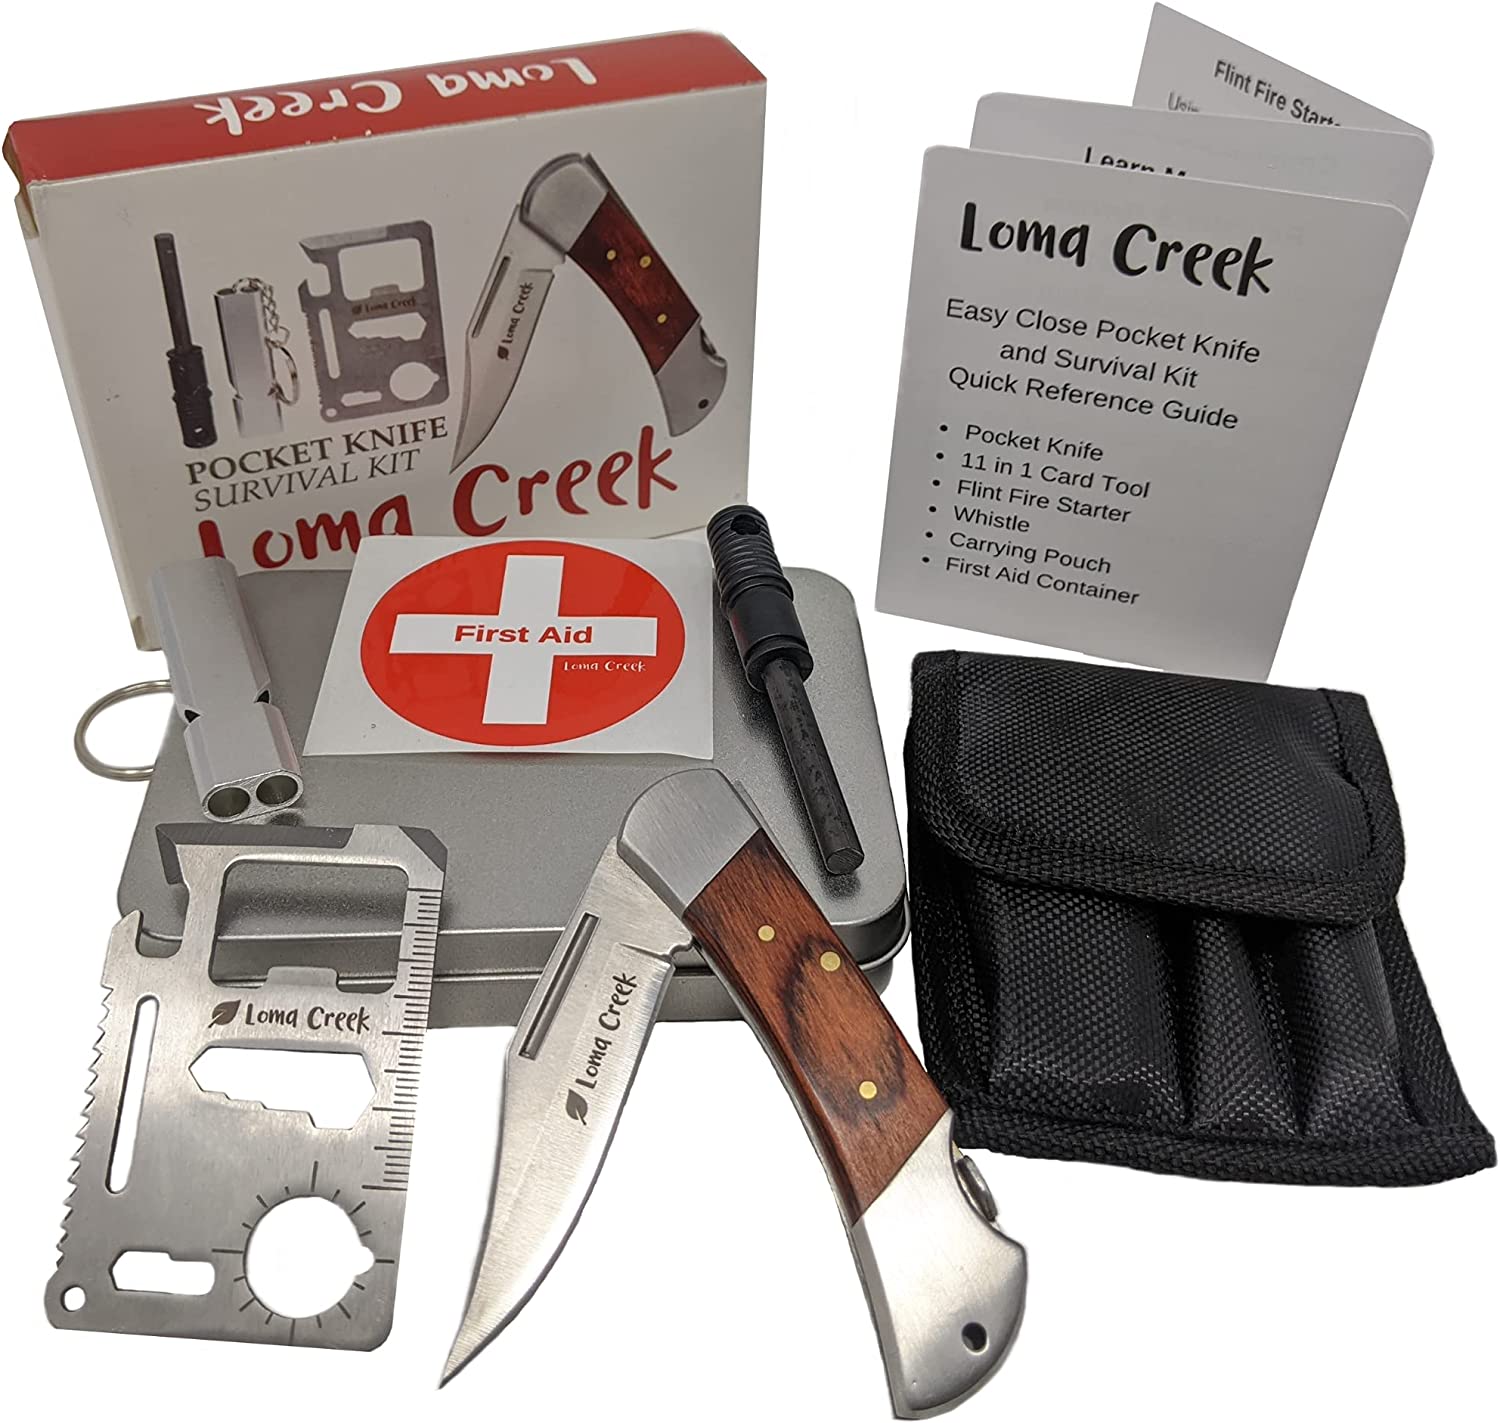 Kids Pocket Knife & Camping Essentials Kit – Multi-Tool Card, Whistle & Fire Starter in a Carrying Case. Easy Close Safety Lock on Knife. Great First Pocket Knife – Made to Last a Lifetime